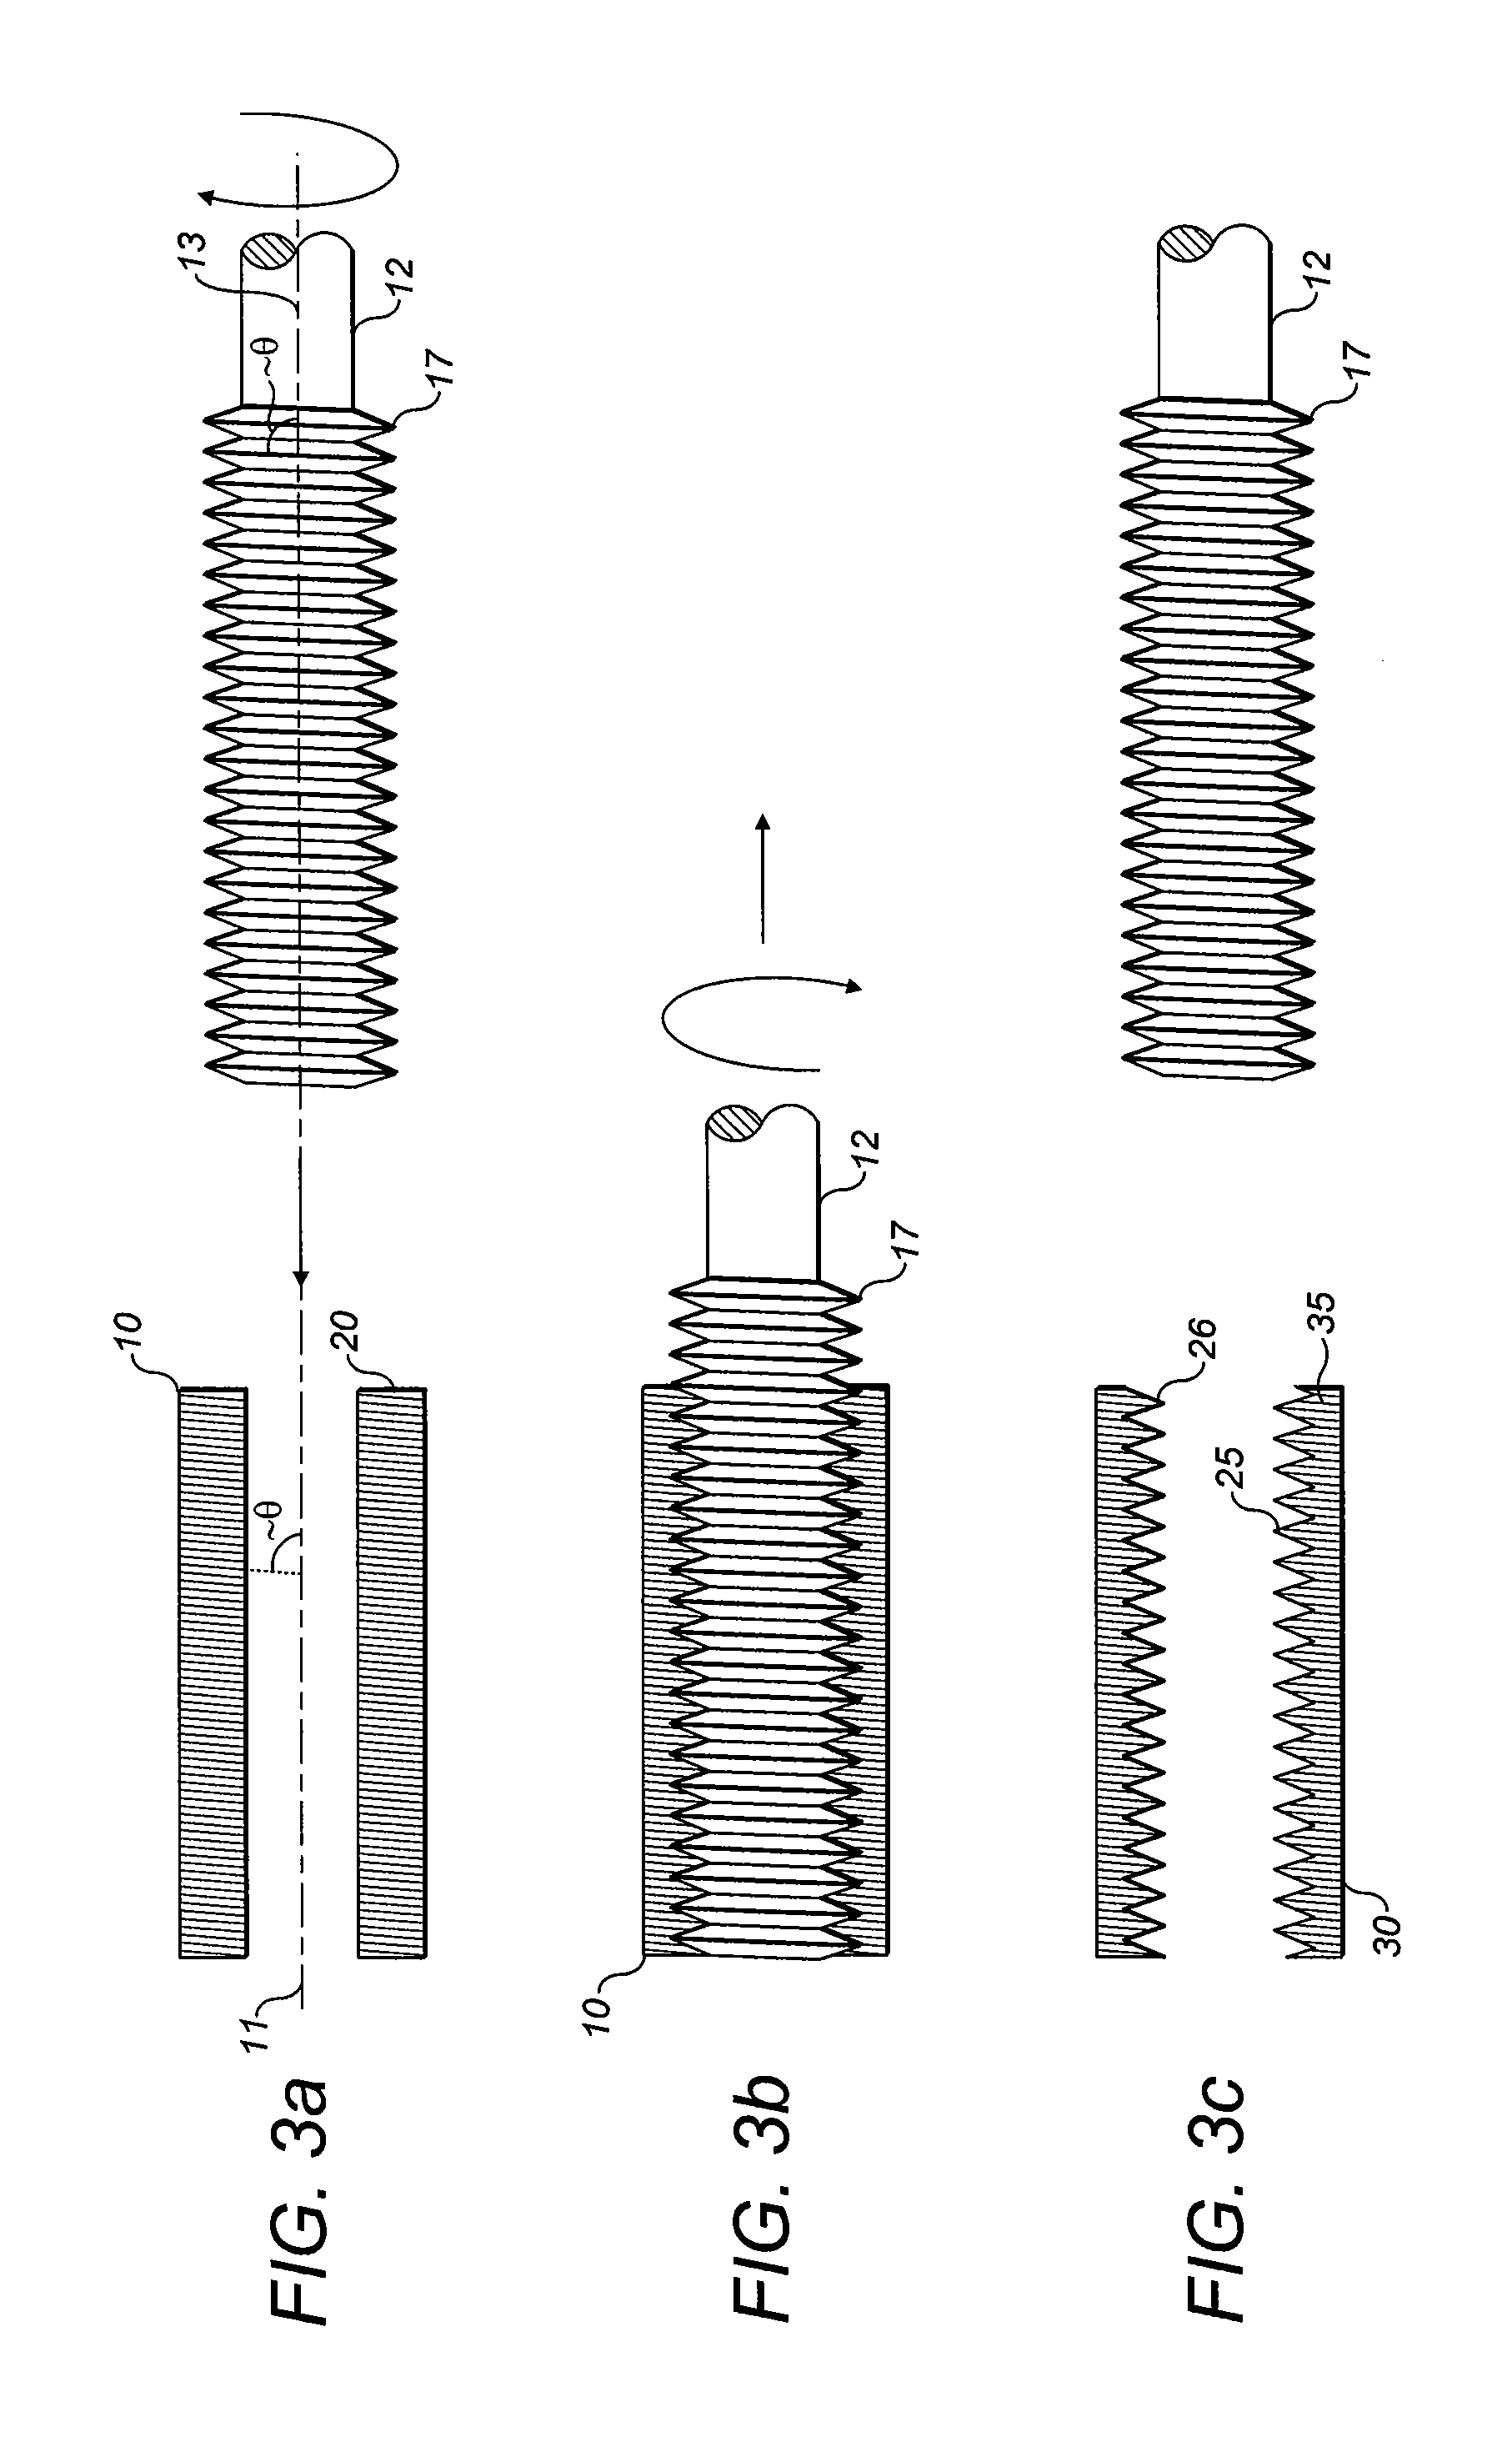 Insert for forming an end connection in a uni-axial composite material